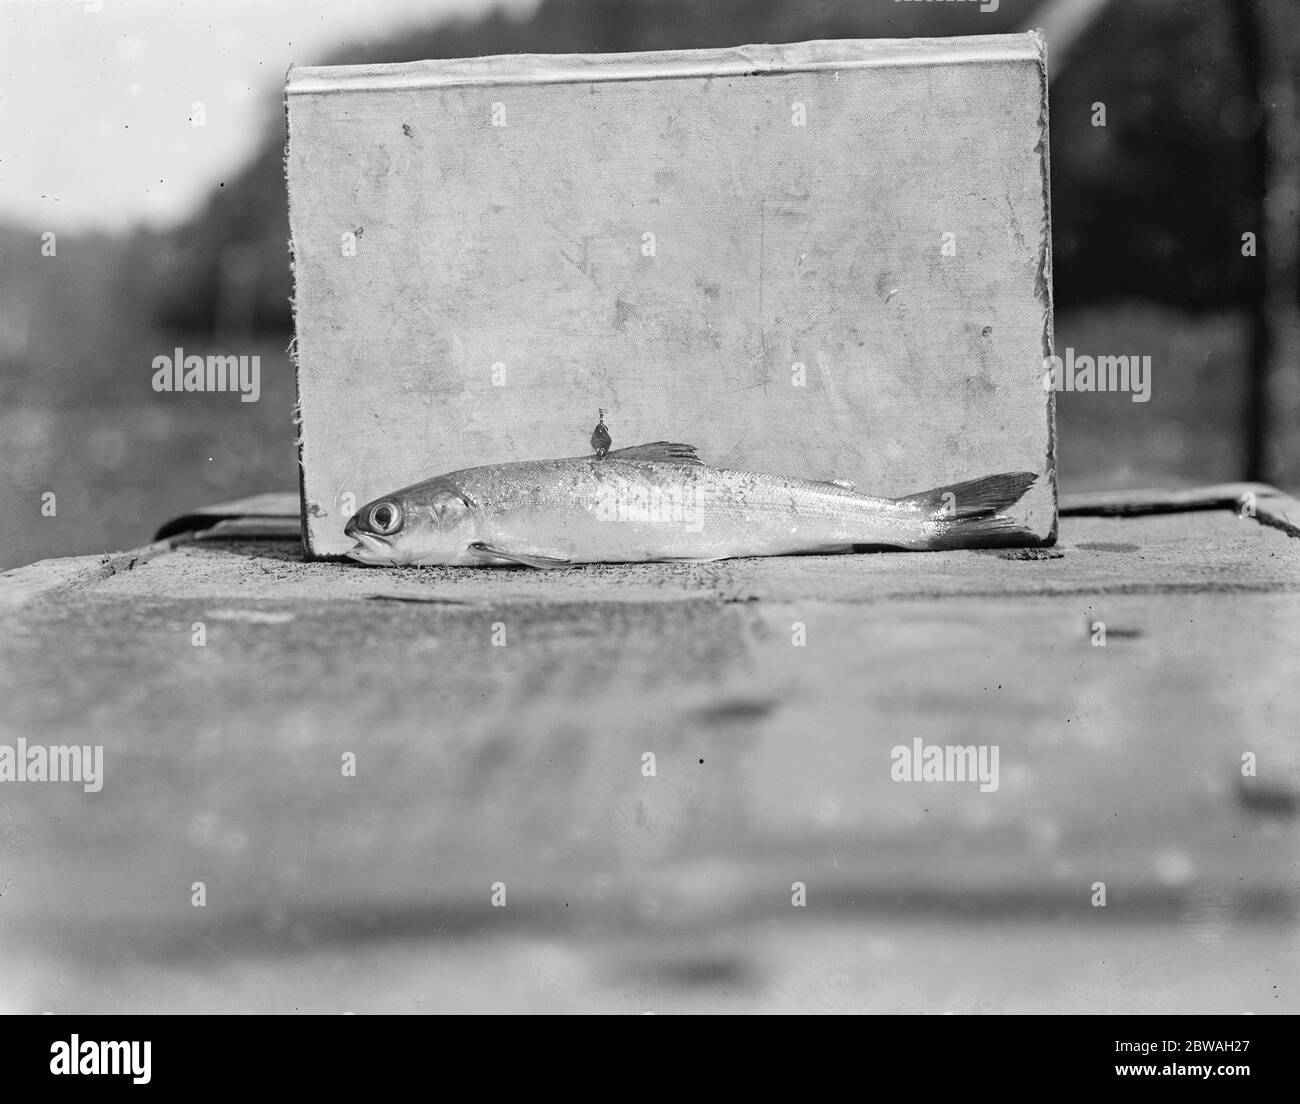 Salmon fishing at Symonds Yat A smolt with its metal identification tag in the dorsal fin Stock Photo